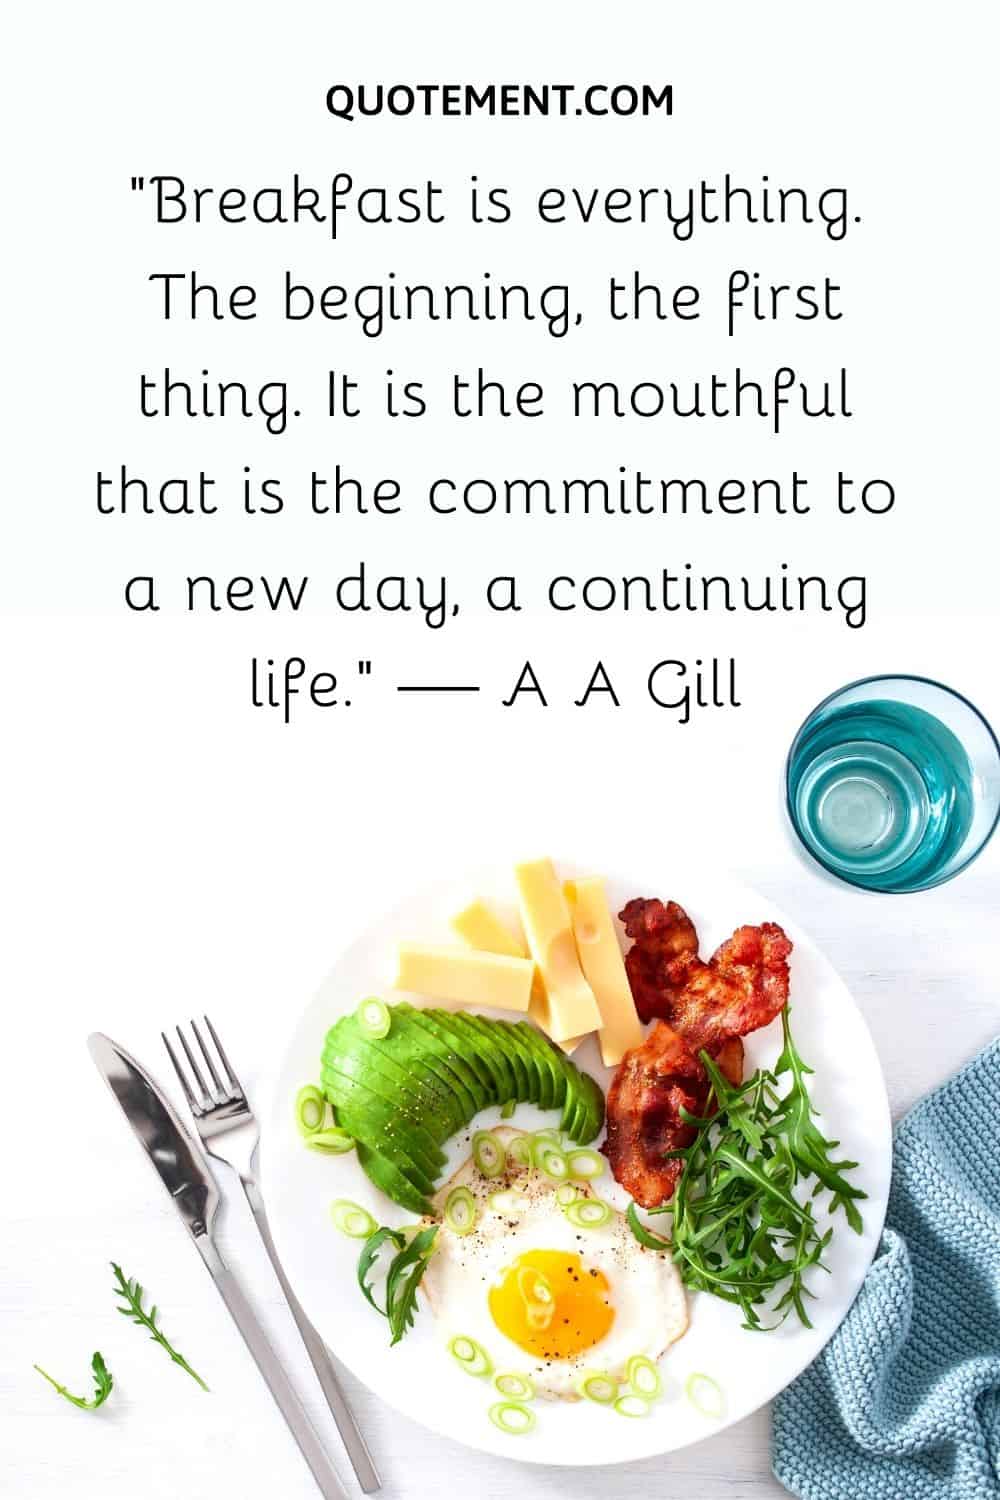 “Breakfast is everything. The beginning, the first thing. It is the mouthful that is the commitment to a new day, a continuing life.” — A A Gill